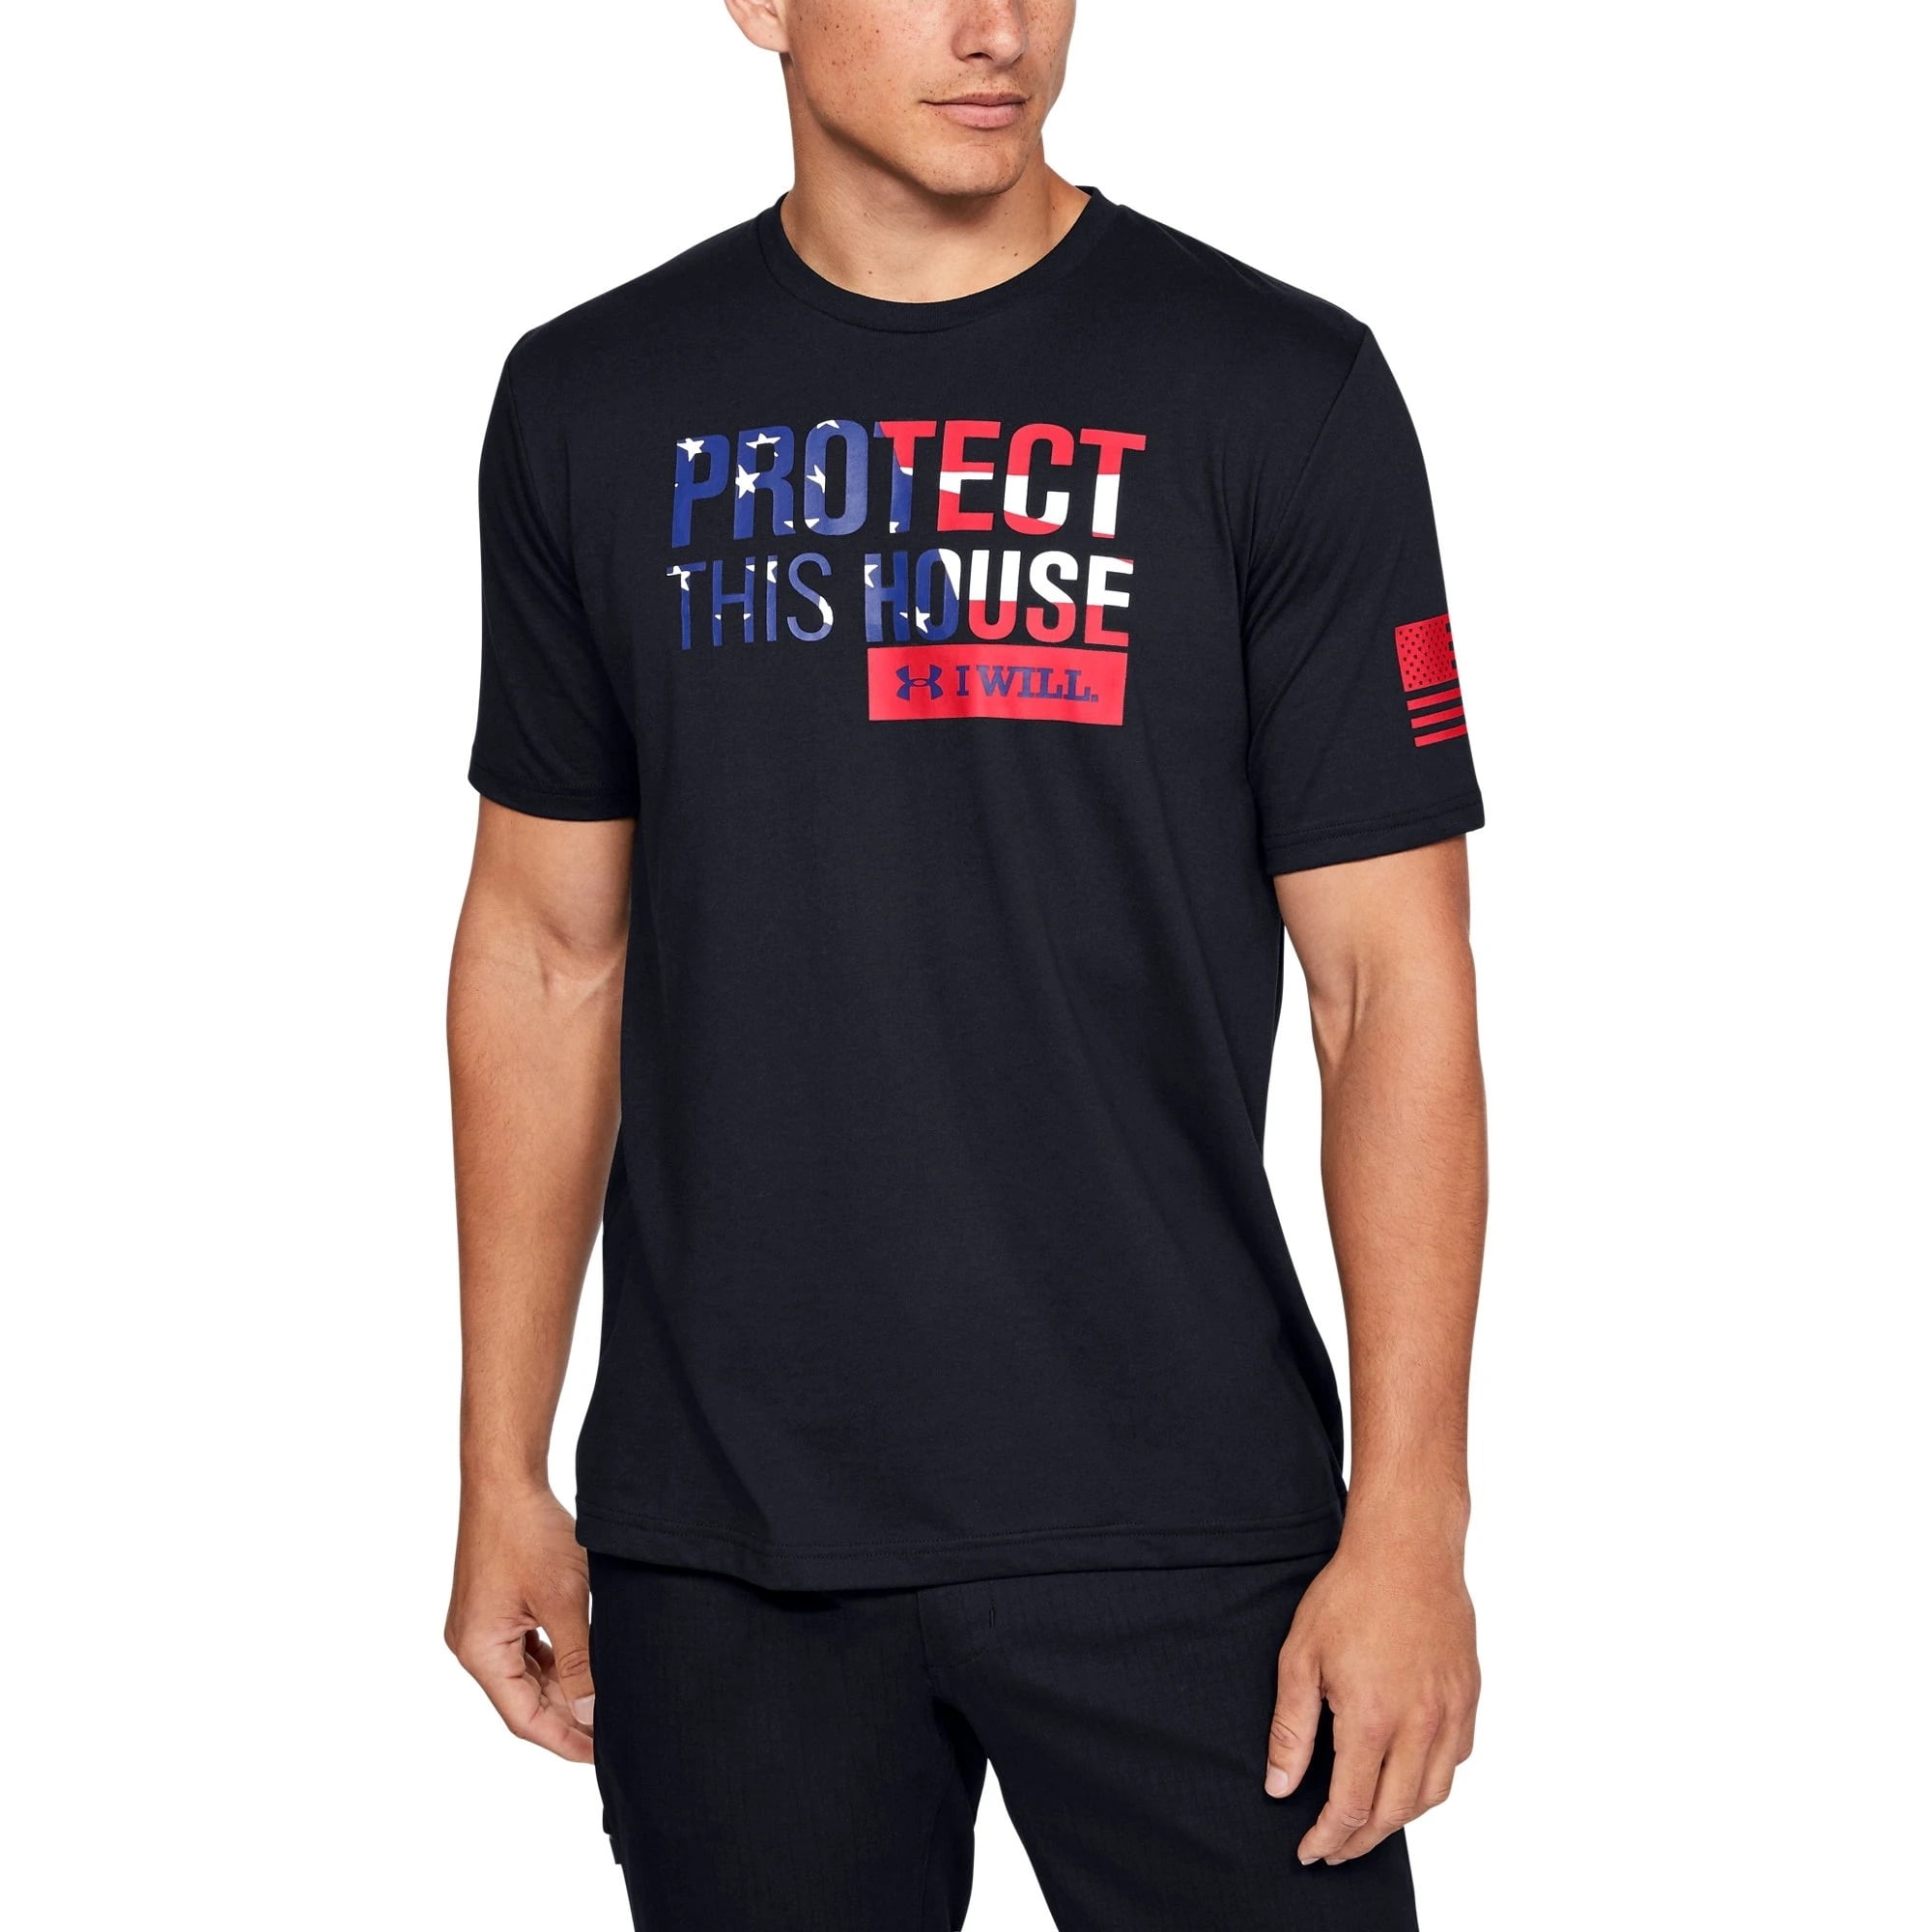 Mens Under Armour Freedom Protect This House Shirt